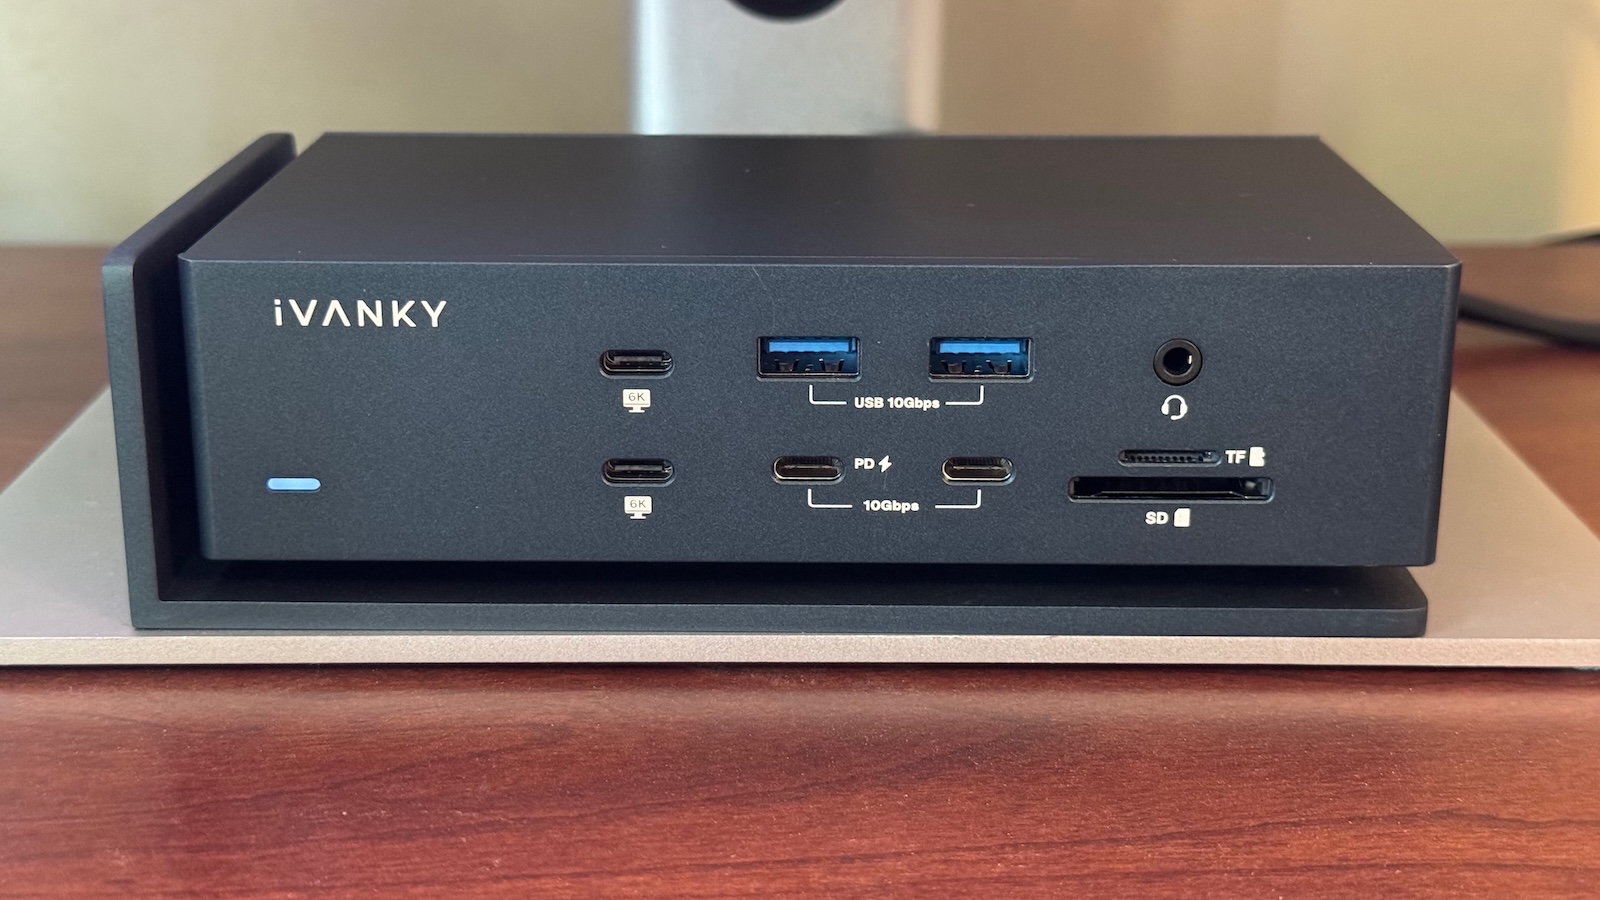 Review: iVANKY’s FusionDock Max 1 Delivers Extreme Versatility With Dual Thunderbolt Connectivity